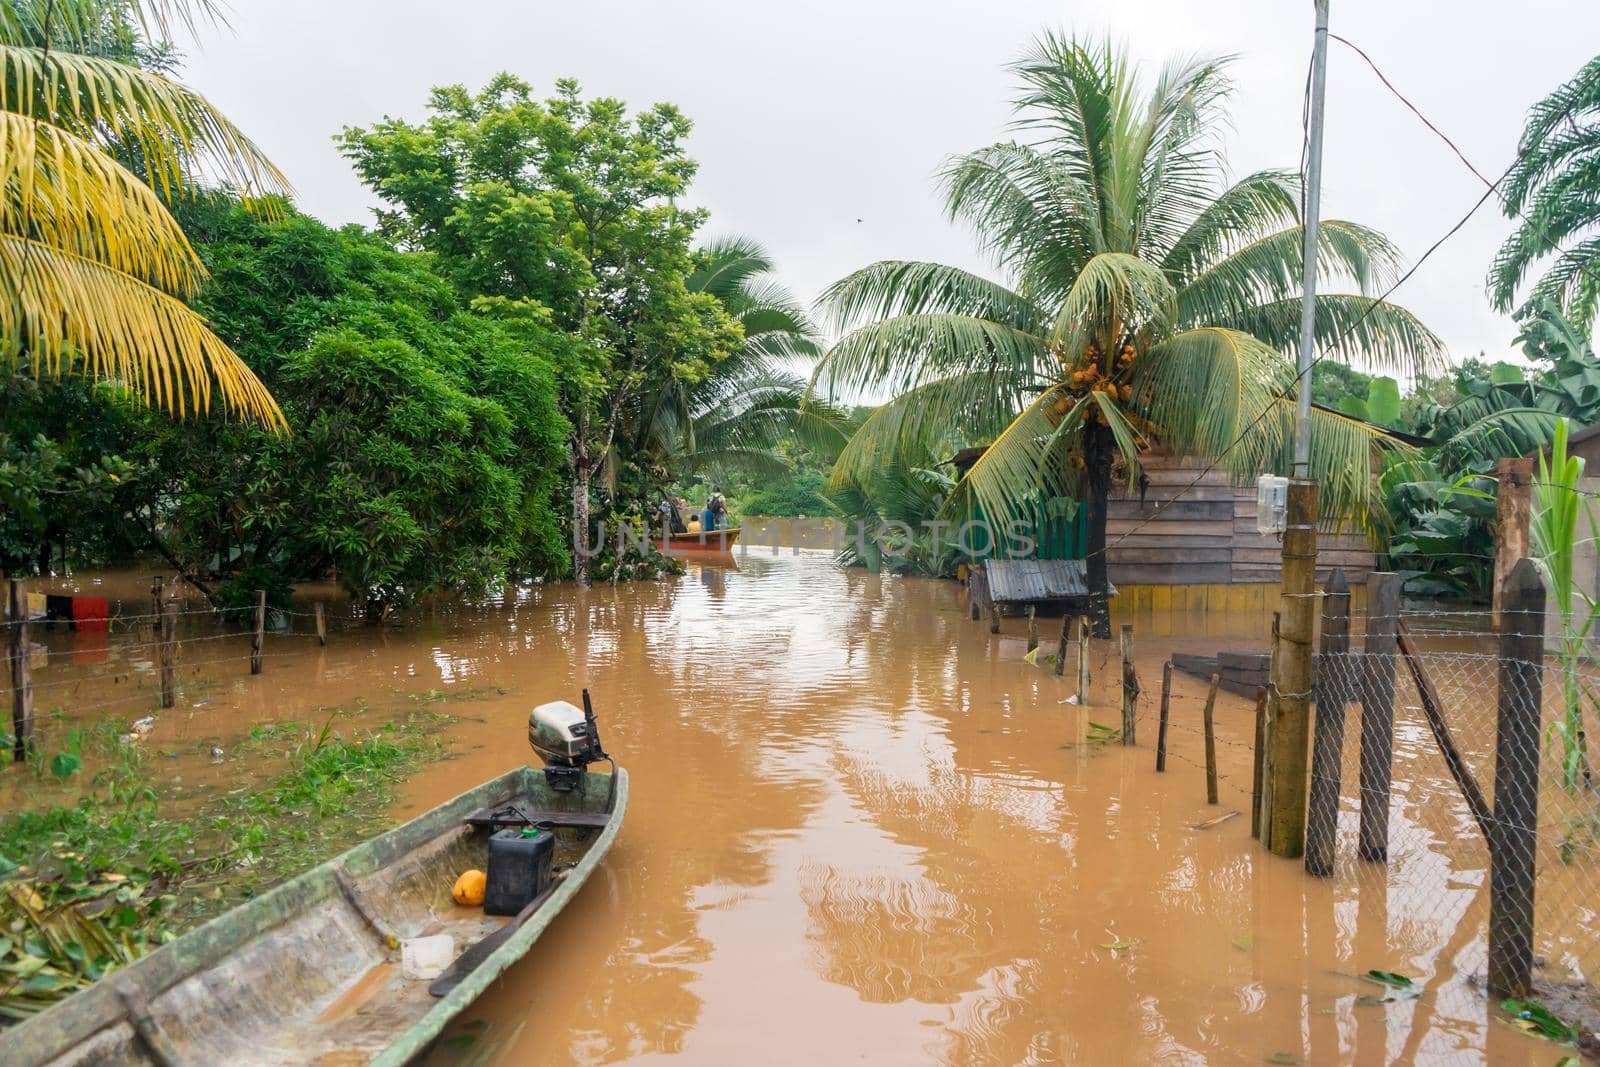 Boats crossing a swollen river in the municipality of El Rama, North Caribbean of Nicaragua